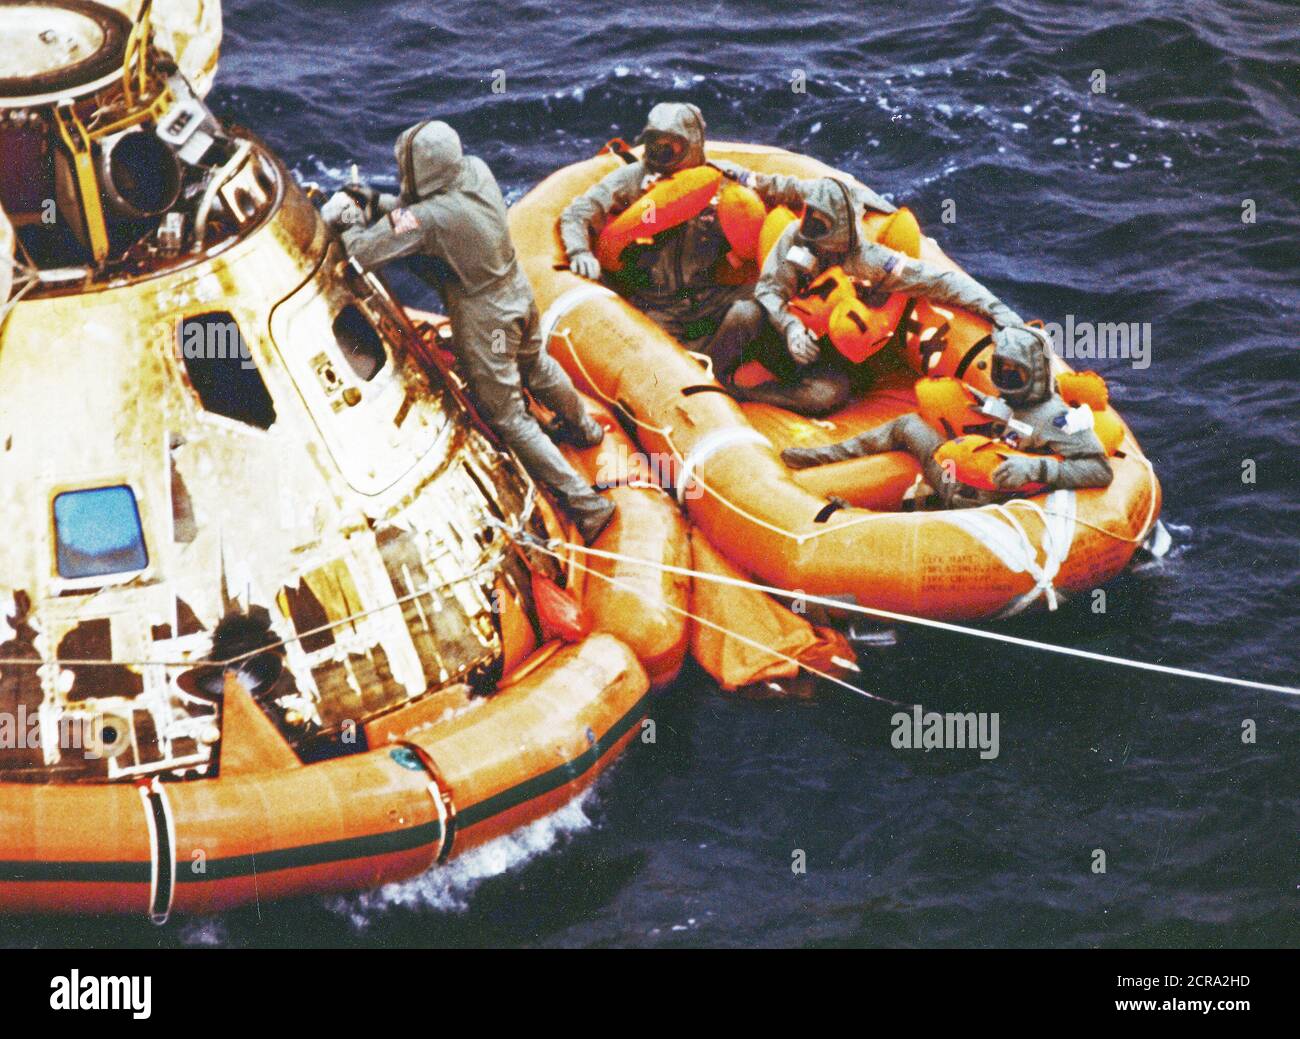 Pararescueman Lt. Clancy Hatleberg closes the Apollo 11 spacecraft hatch as astronauts Neil Armstrong, Michael Collins, and Buzz Aldrin, Jr., await helicopter pickup from their life raft. They splashed down at 12:50 pm EDT July 24, 1969, 900 miles southwest of Hawaii after a successful lunar landing mission. Stock Photo